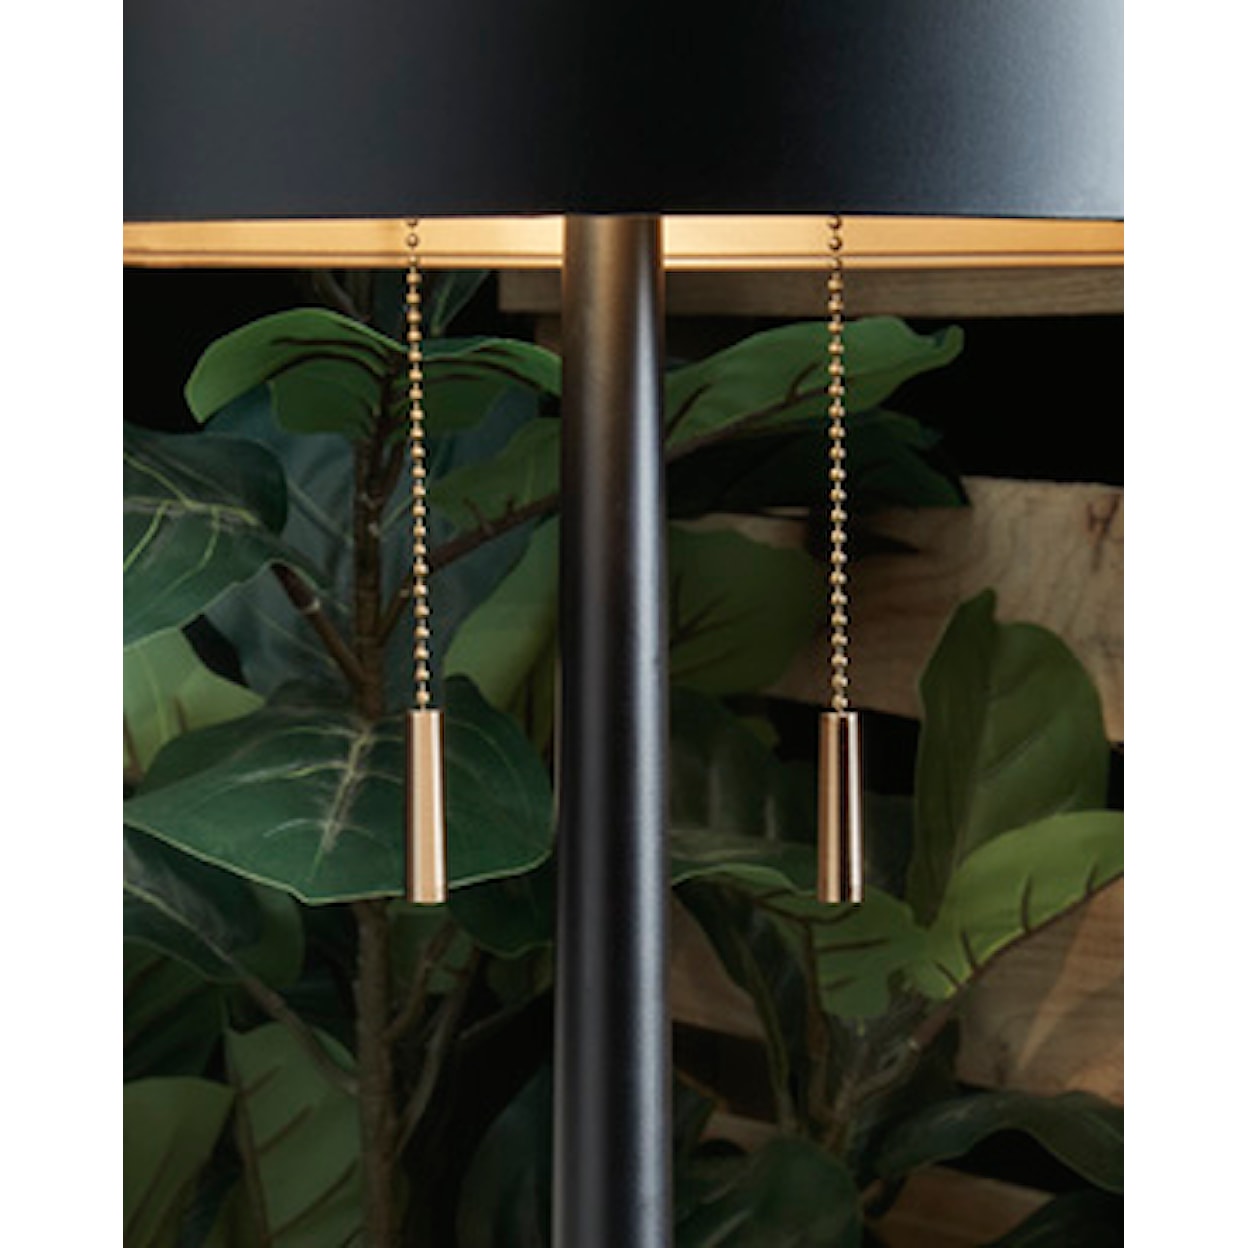 Signature Design by Ashley Lamps - Contemporary Amadell Table Lamp